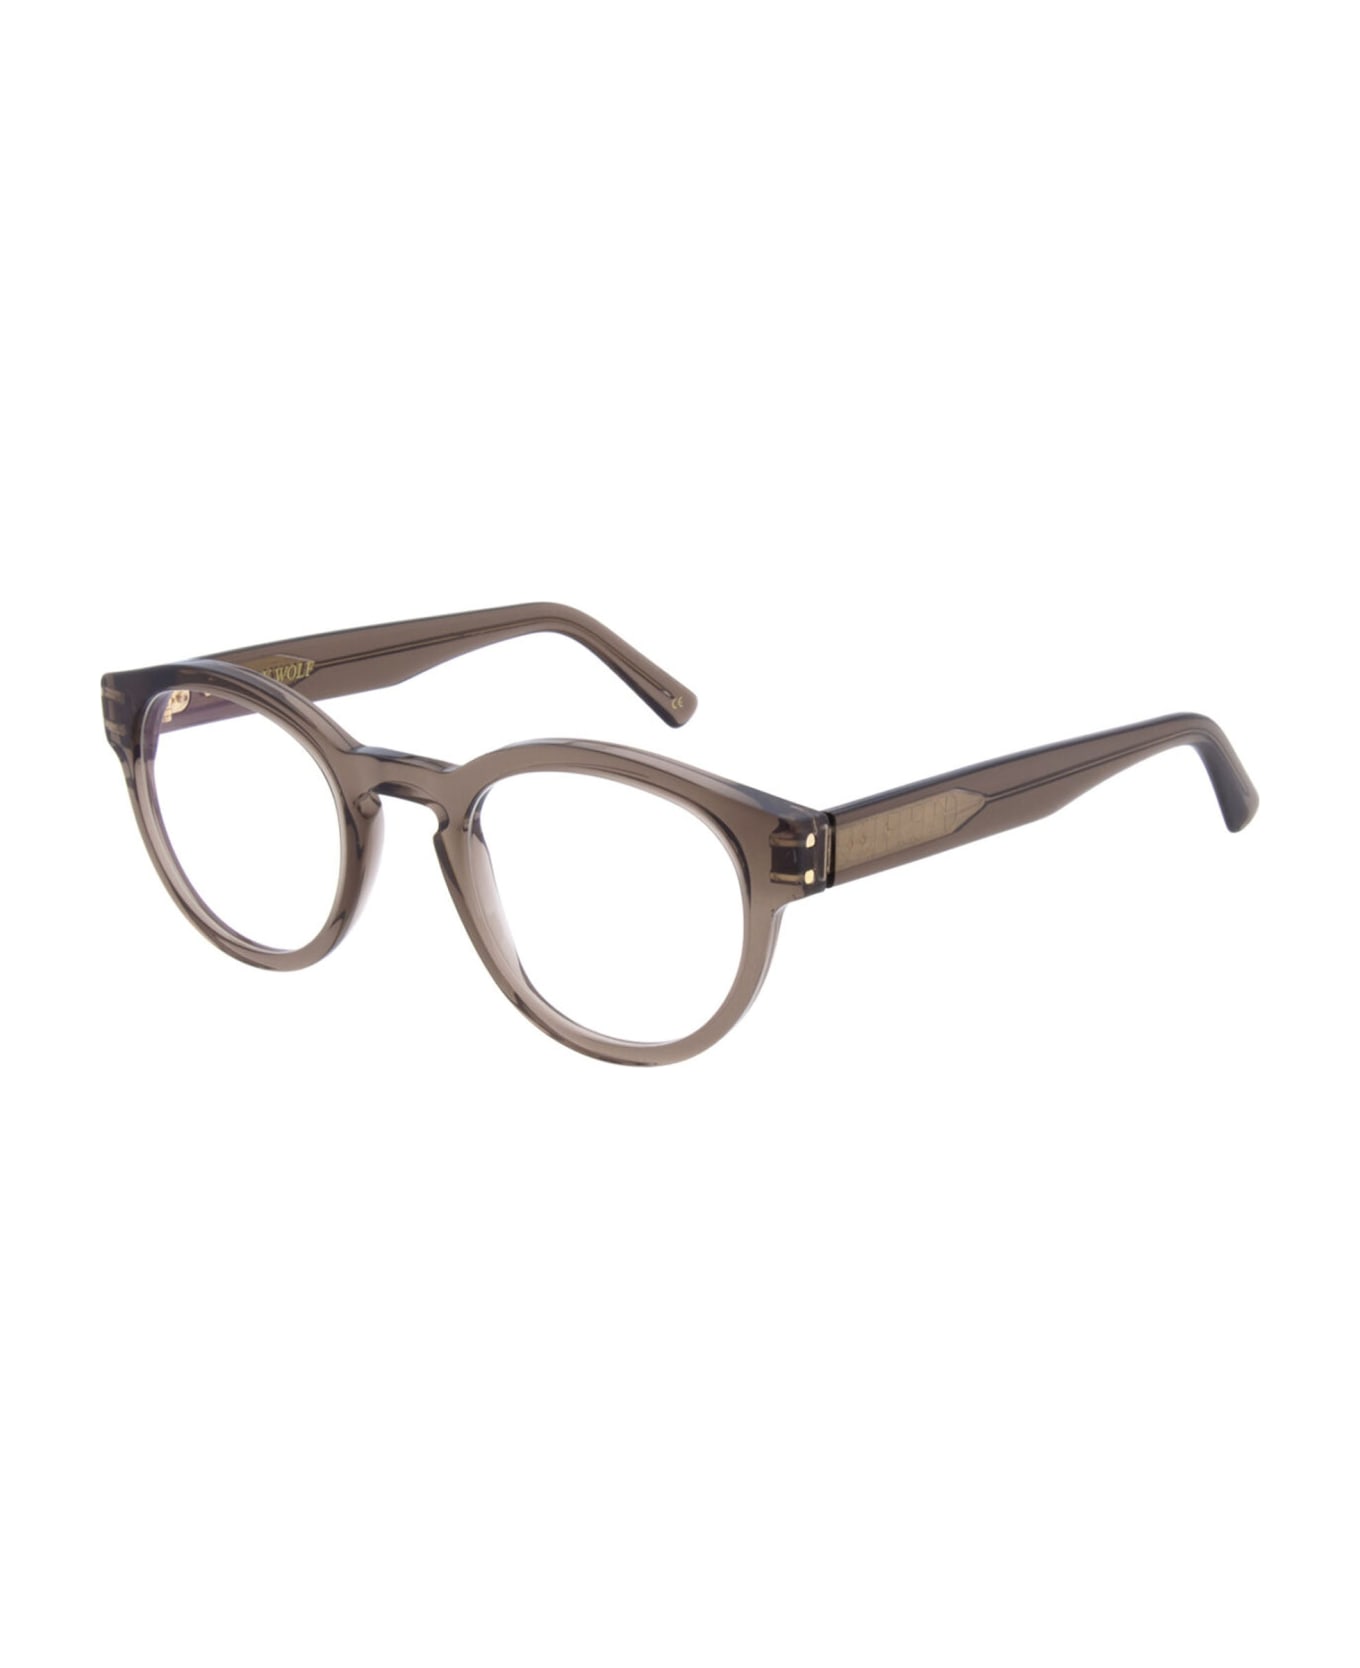 Andy Wolf Aw03 - Brown / Gold Glasses - light brown アイウェア